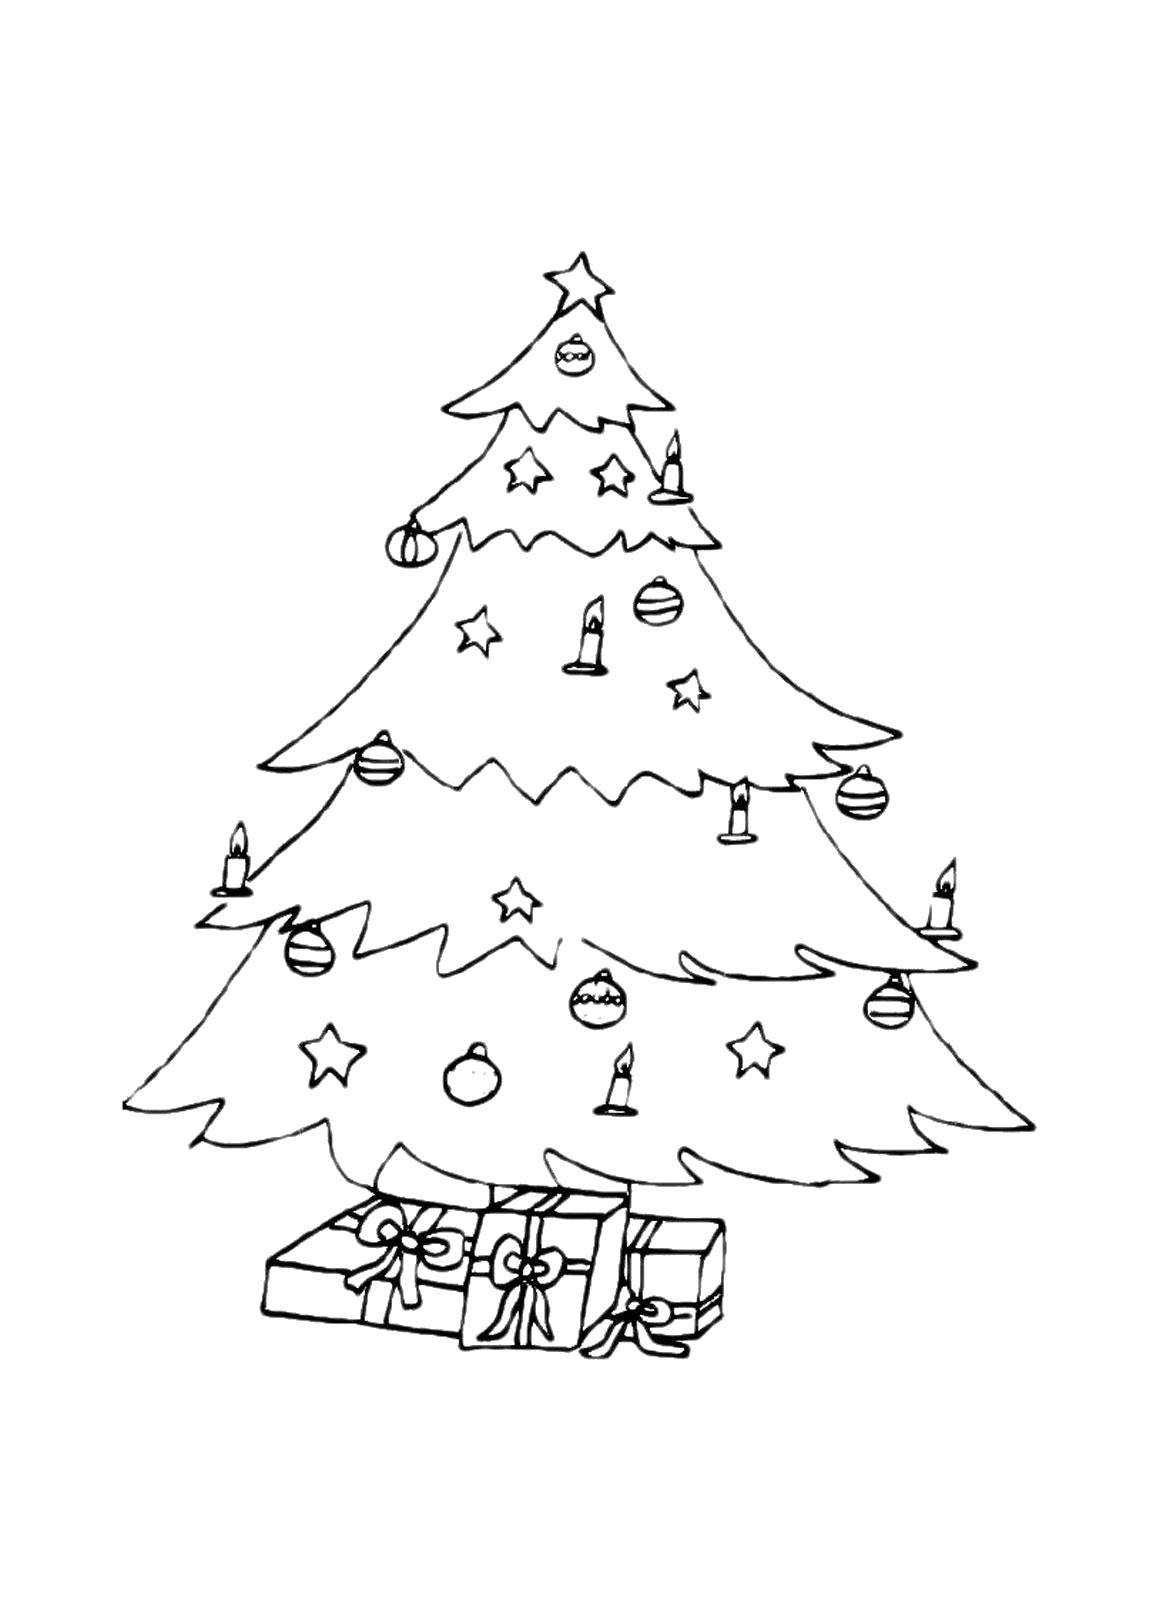 Coloring Toys on the Christmas tree and gifts under it. Category coloring Christmas tree. Tags:  New Year, tree, gifts, toys.